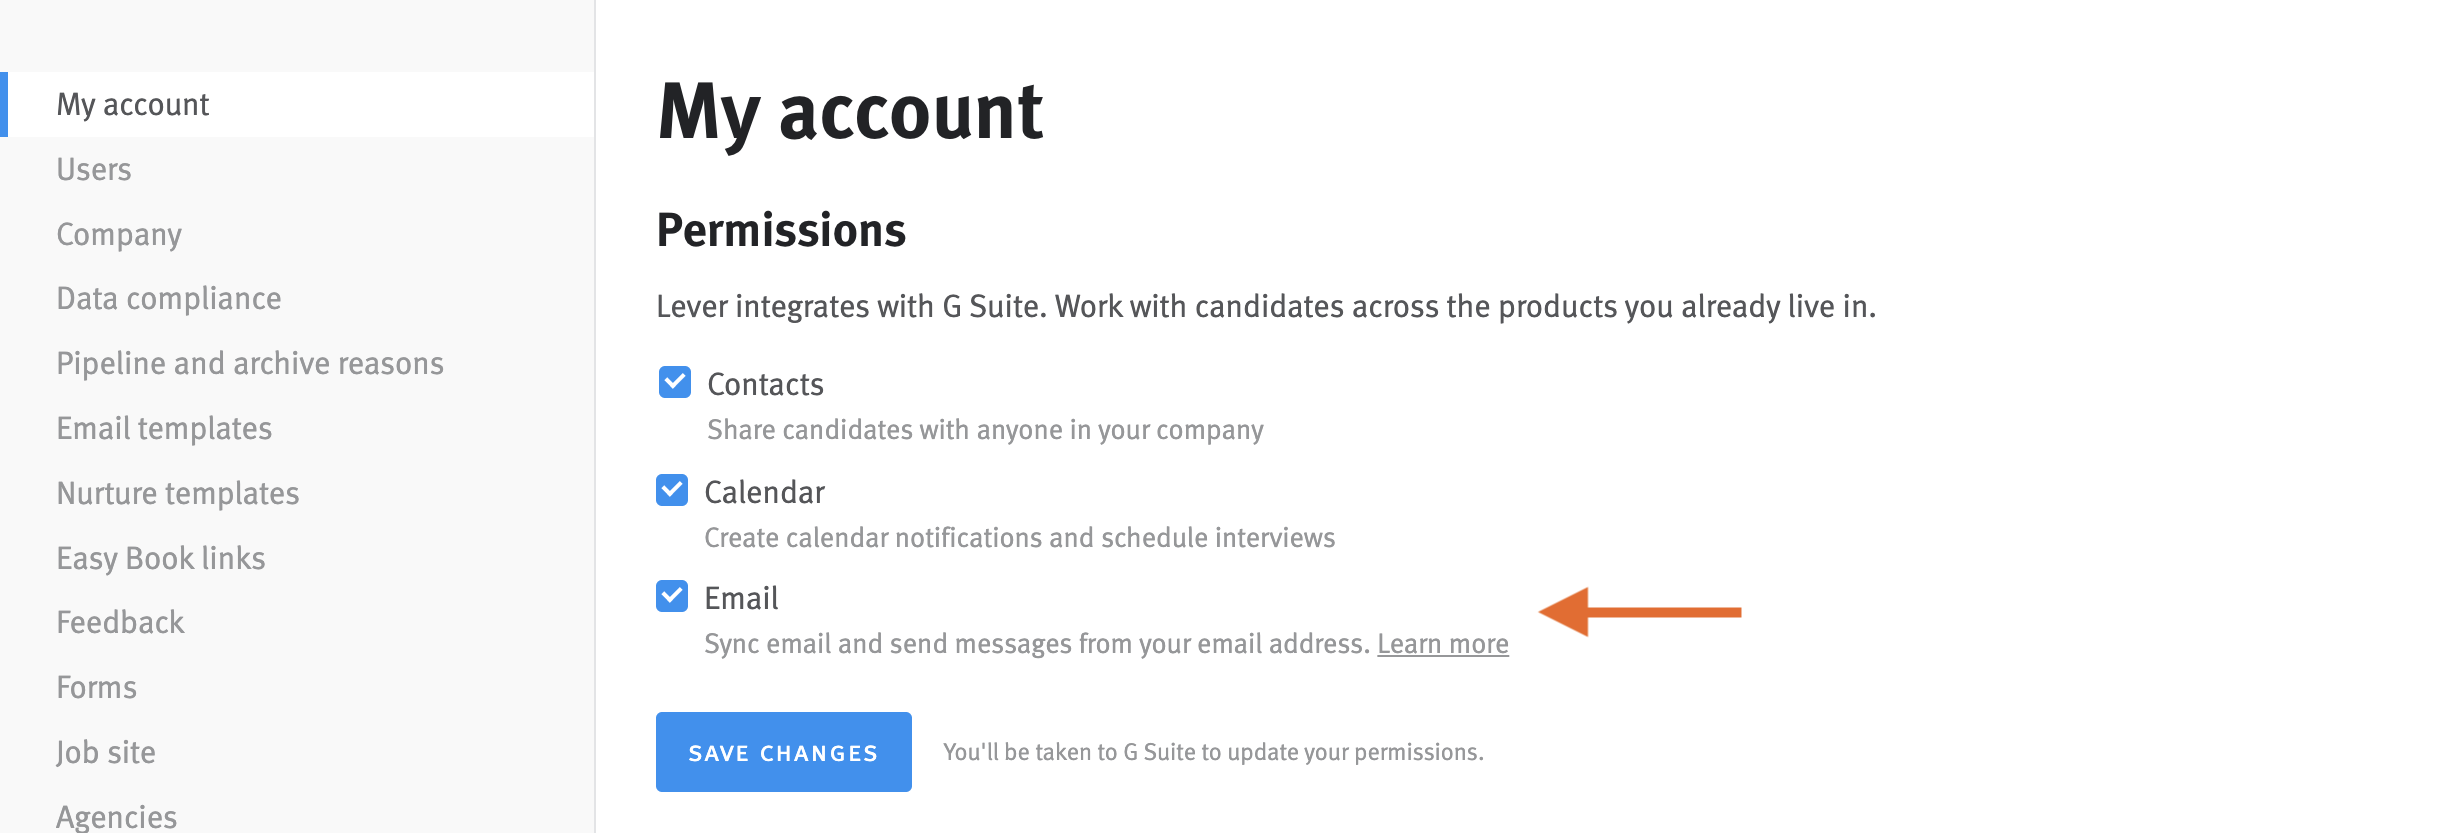 Account permissions page with arrow pointing to email check box